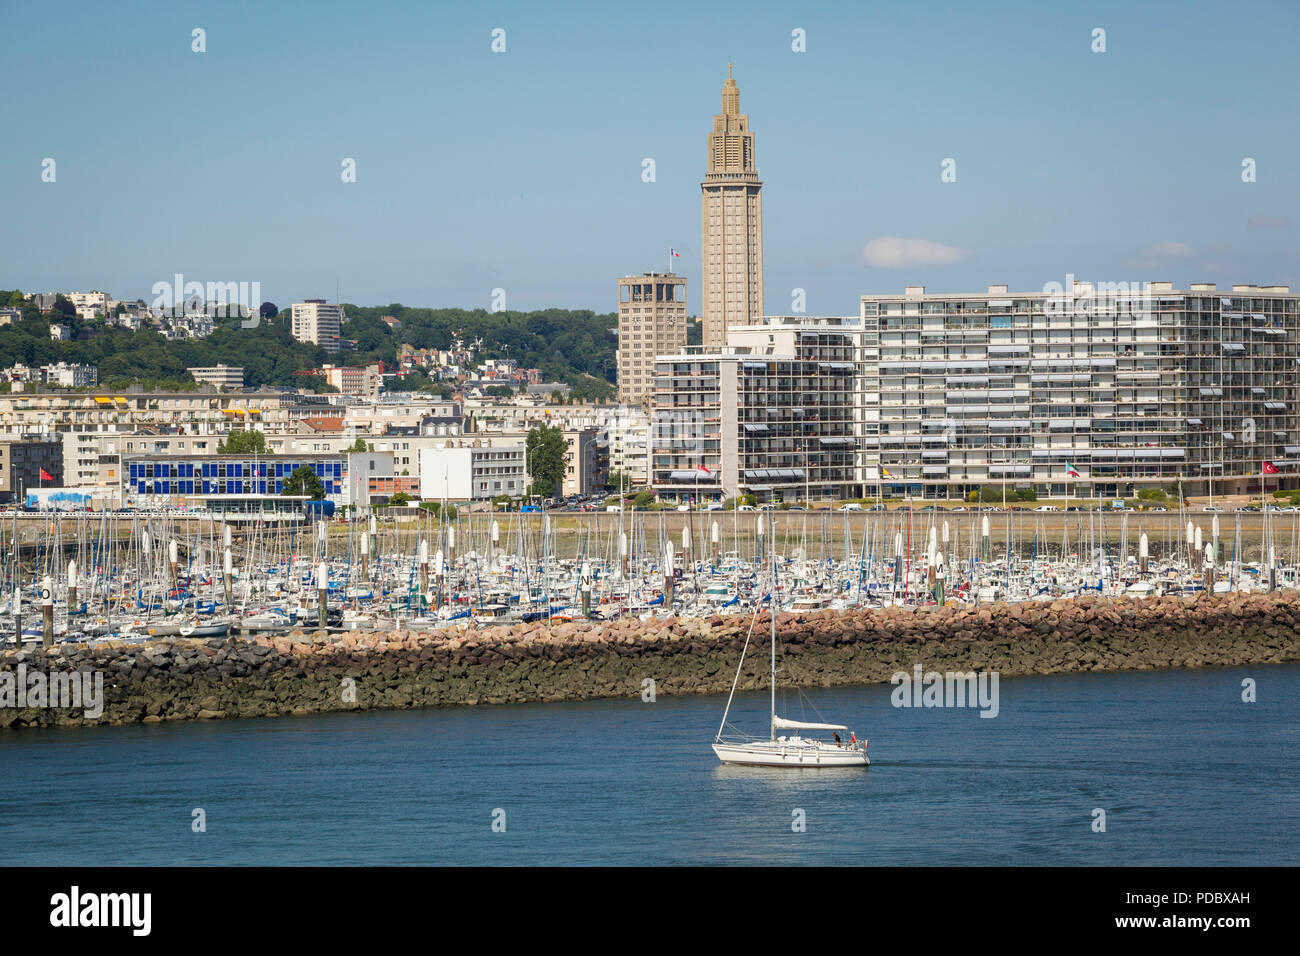 A view from the sea showing The Church of St. Joseph behind the Residence de France apartments and the marina at Le Havre, Normandy, France Stock Photo